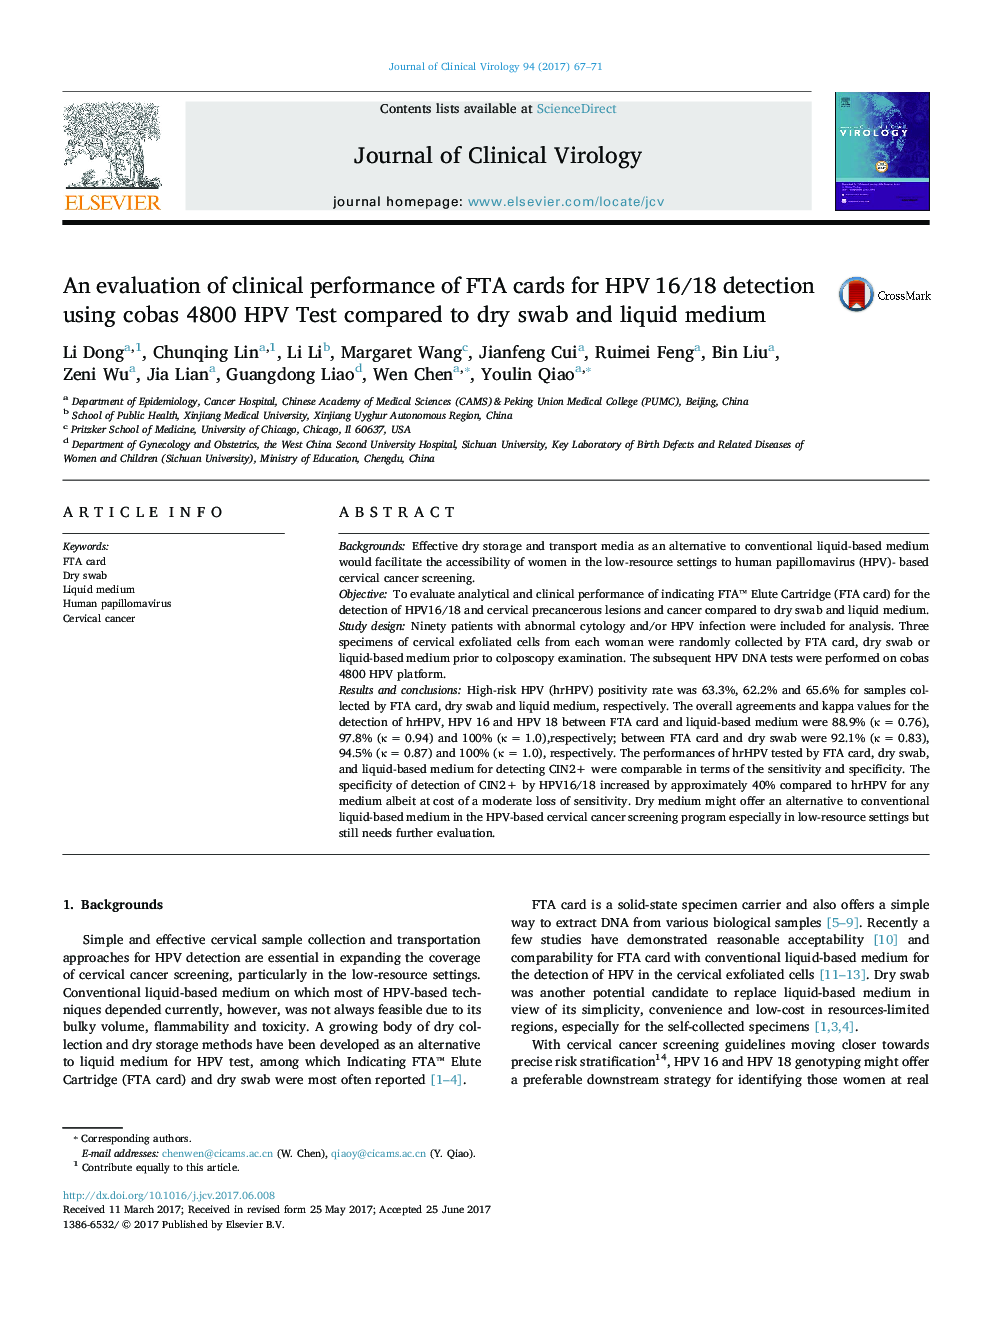 An evaluation of clinical performance of FTA cards for HPV 16/18 detection using cobas 4800 HPV Test compared to dry swab and liquid medium